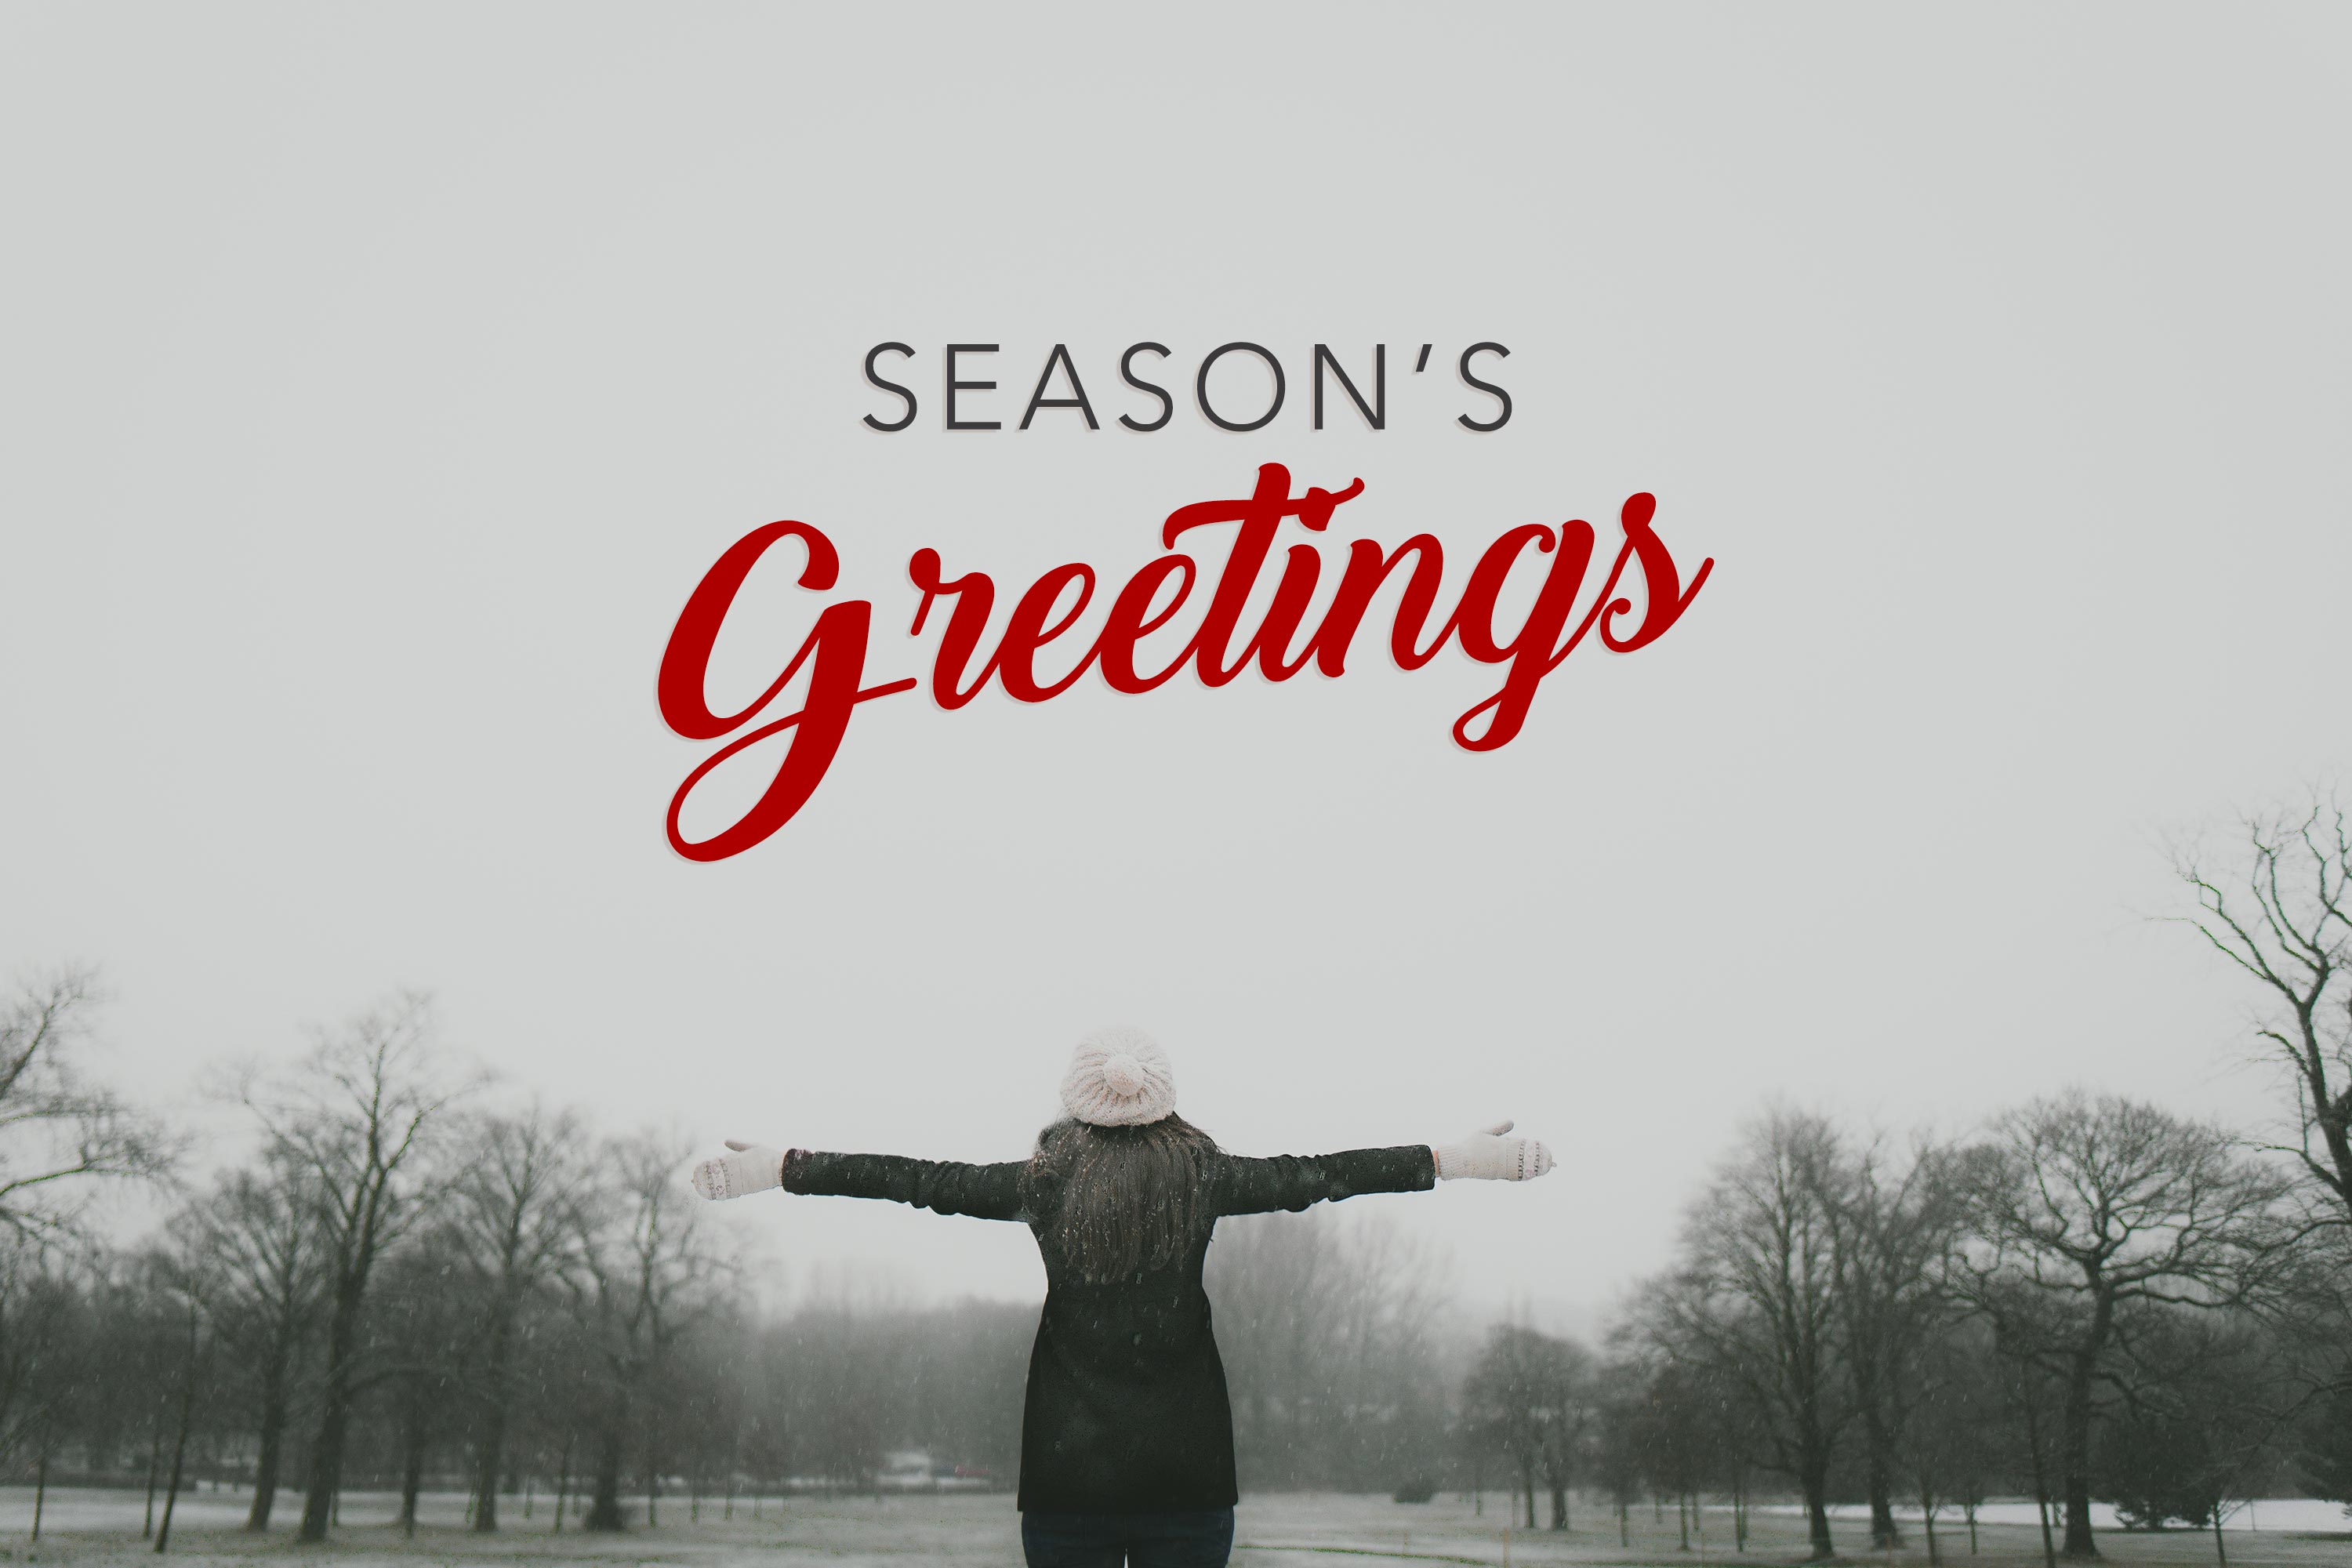  Seasons Greetings Cards Stock Images HD Wallpapers Winter